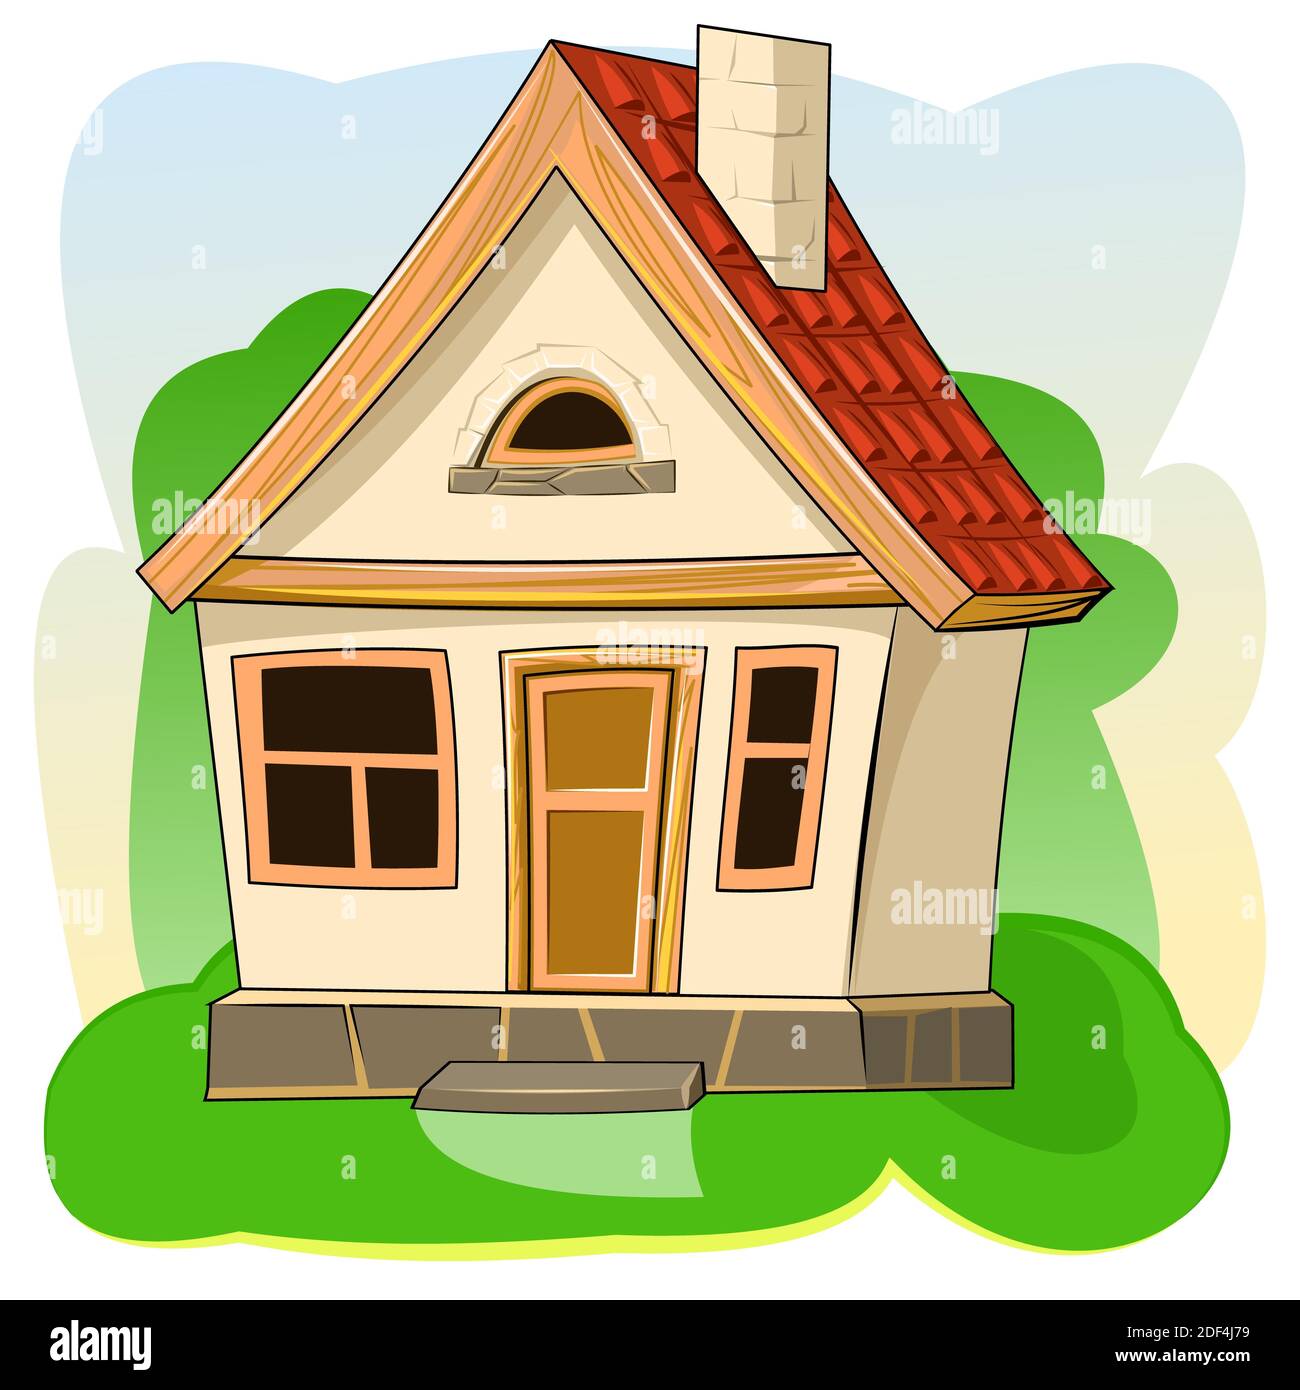 Old village house. Fabulous cartoon object. Cute childish style. Ancient dwelling. Tiny, small. On abstract background. Stock Photo